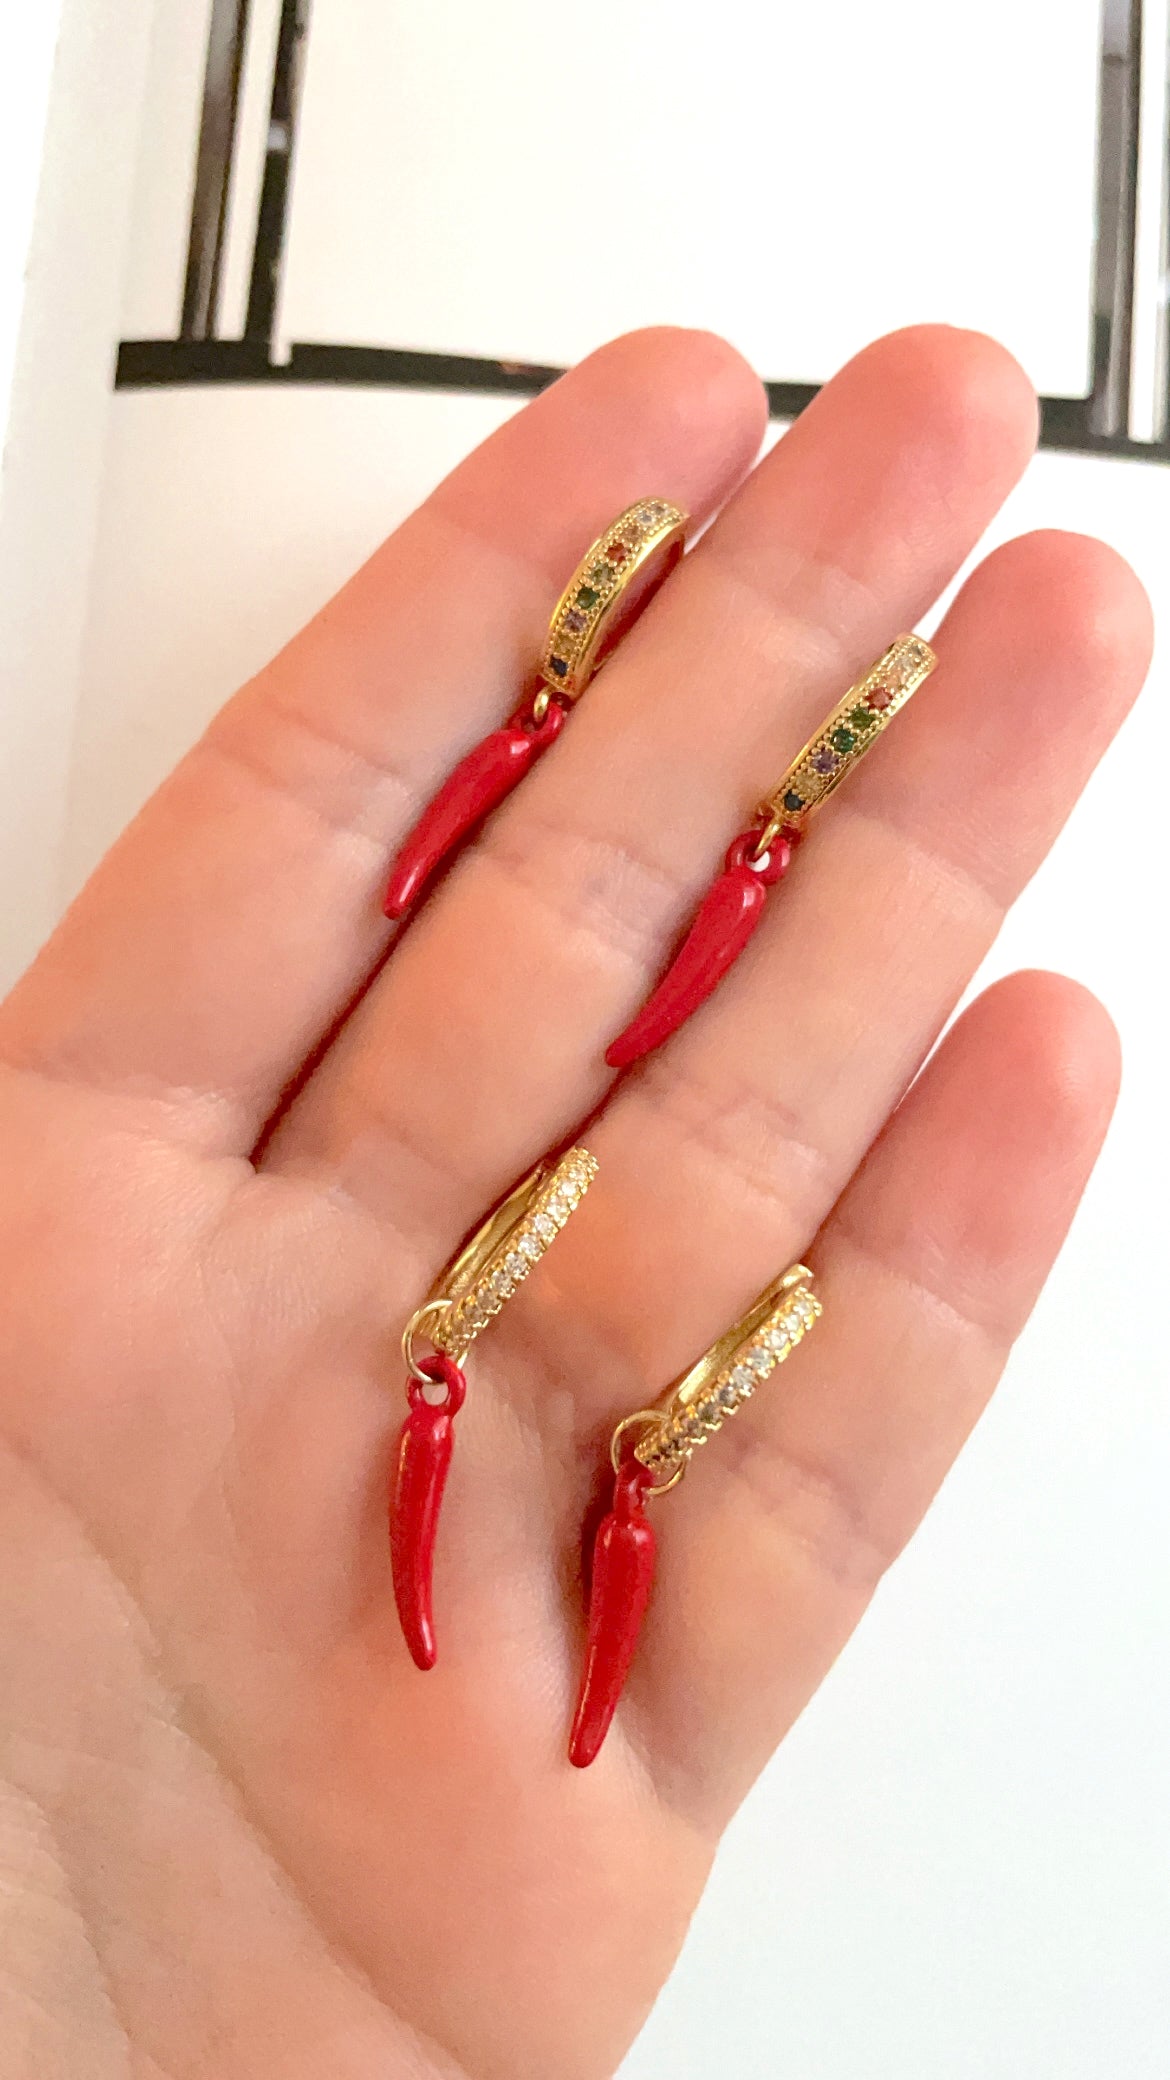 Red Chili 🌶 Earrings